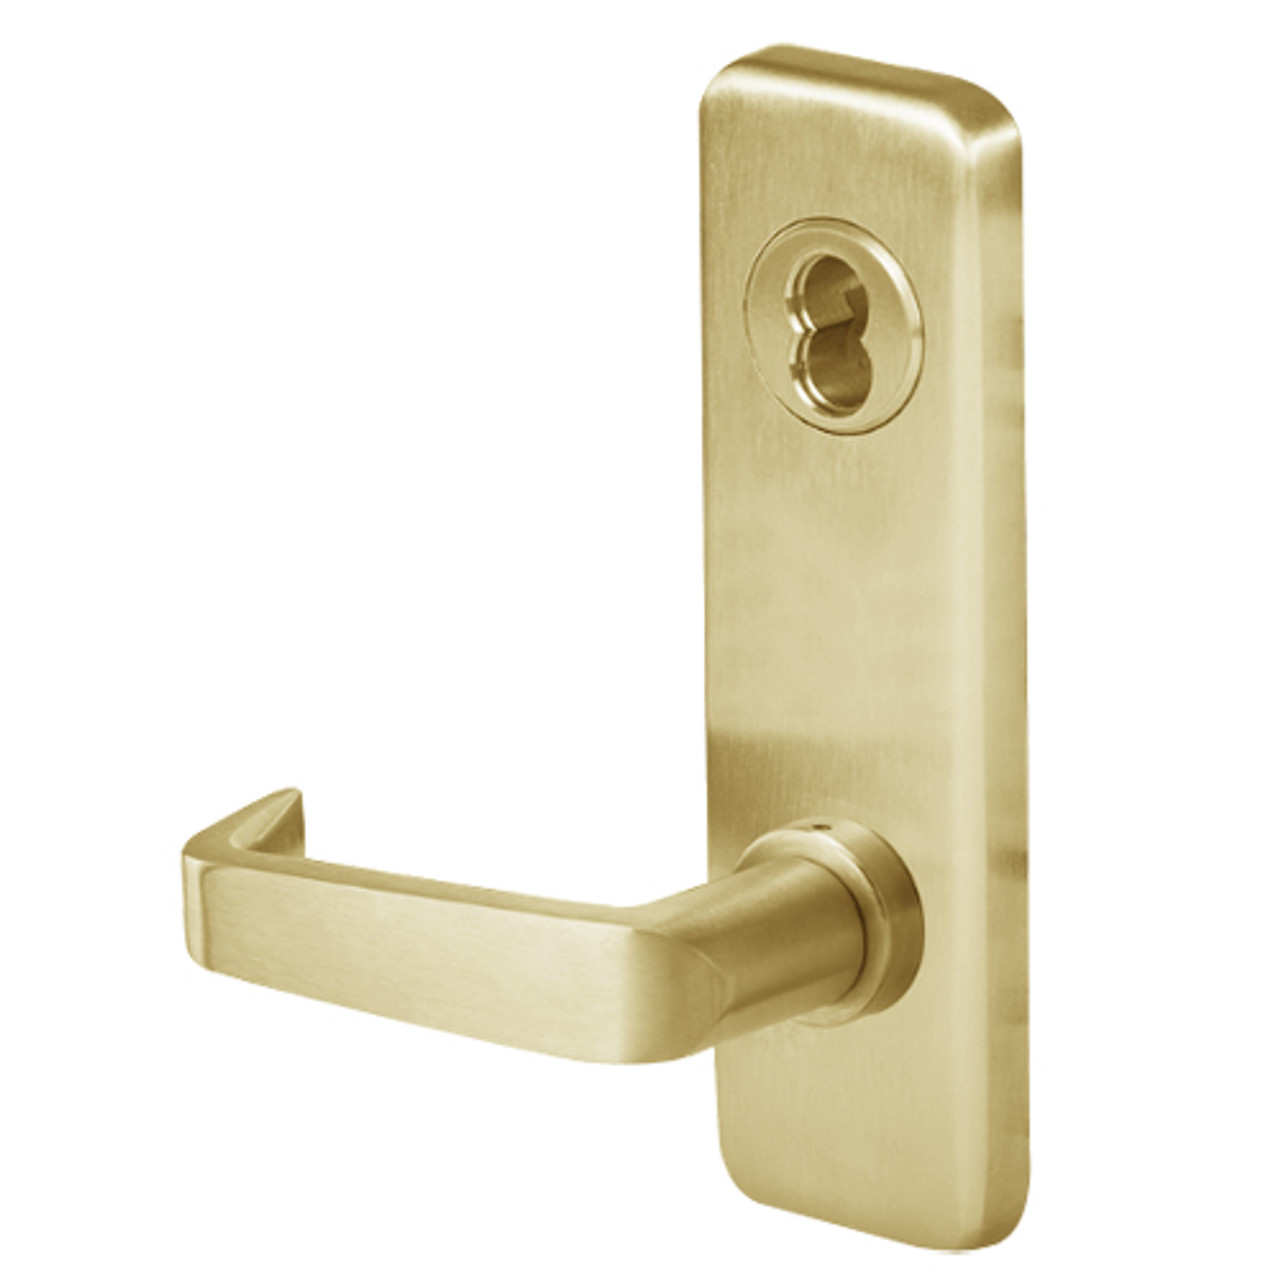 45HW7WEL15J606 Best 40HW series Double Key Latch Fail Safe Electromechanical Mortise Lever Lock with Contour w/ Angle Return Style in Satin Brass